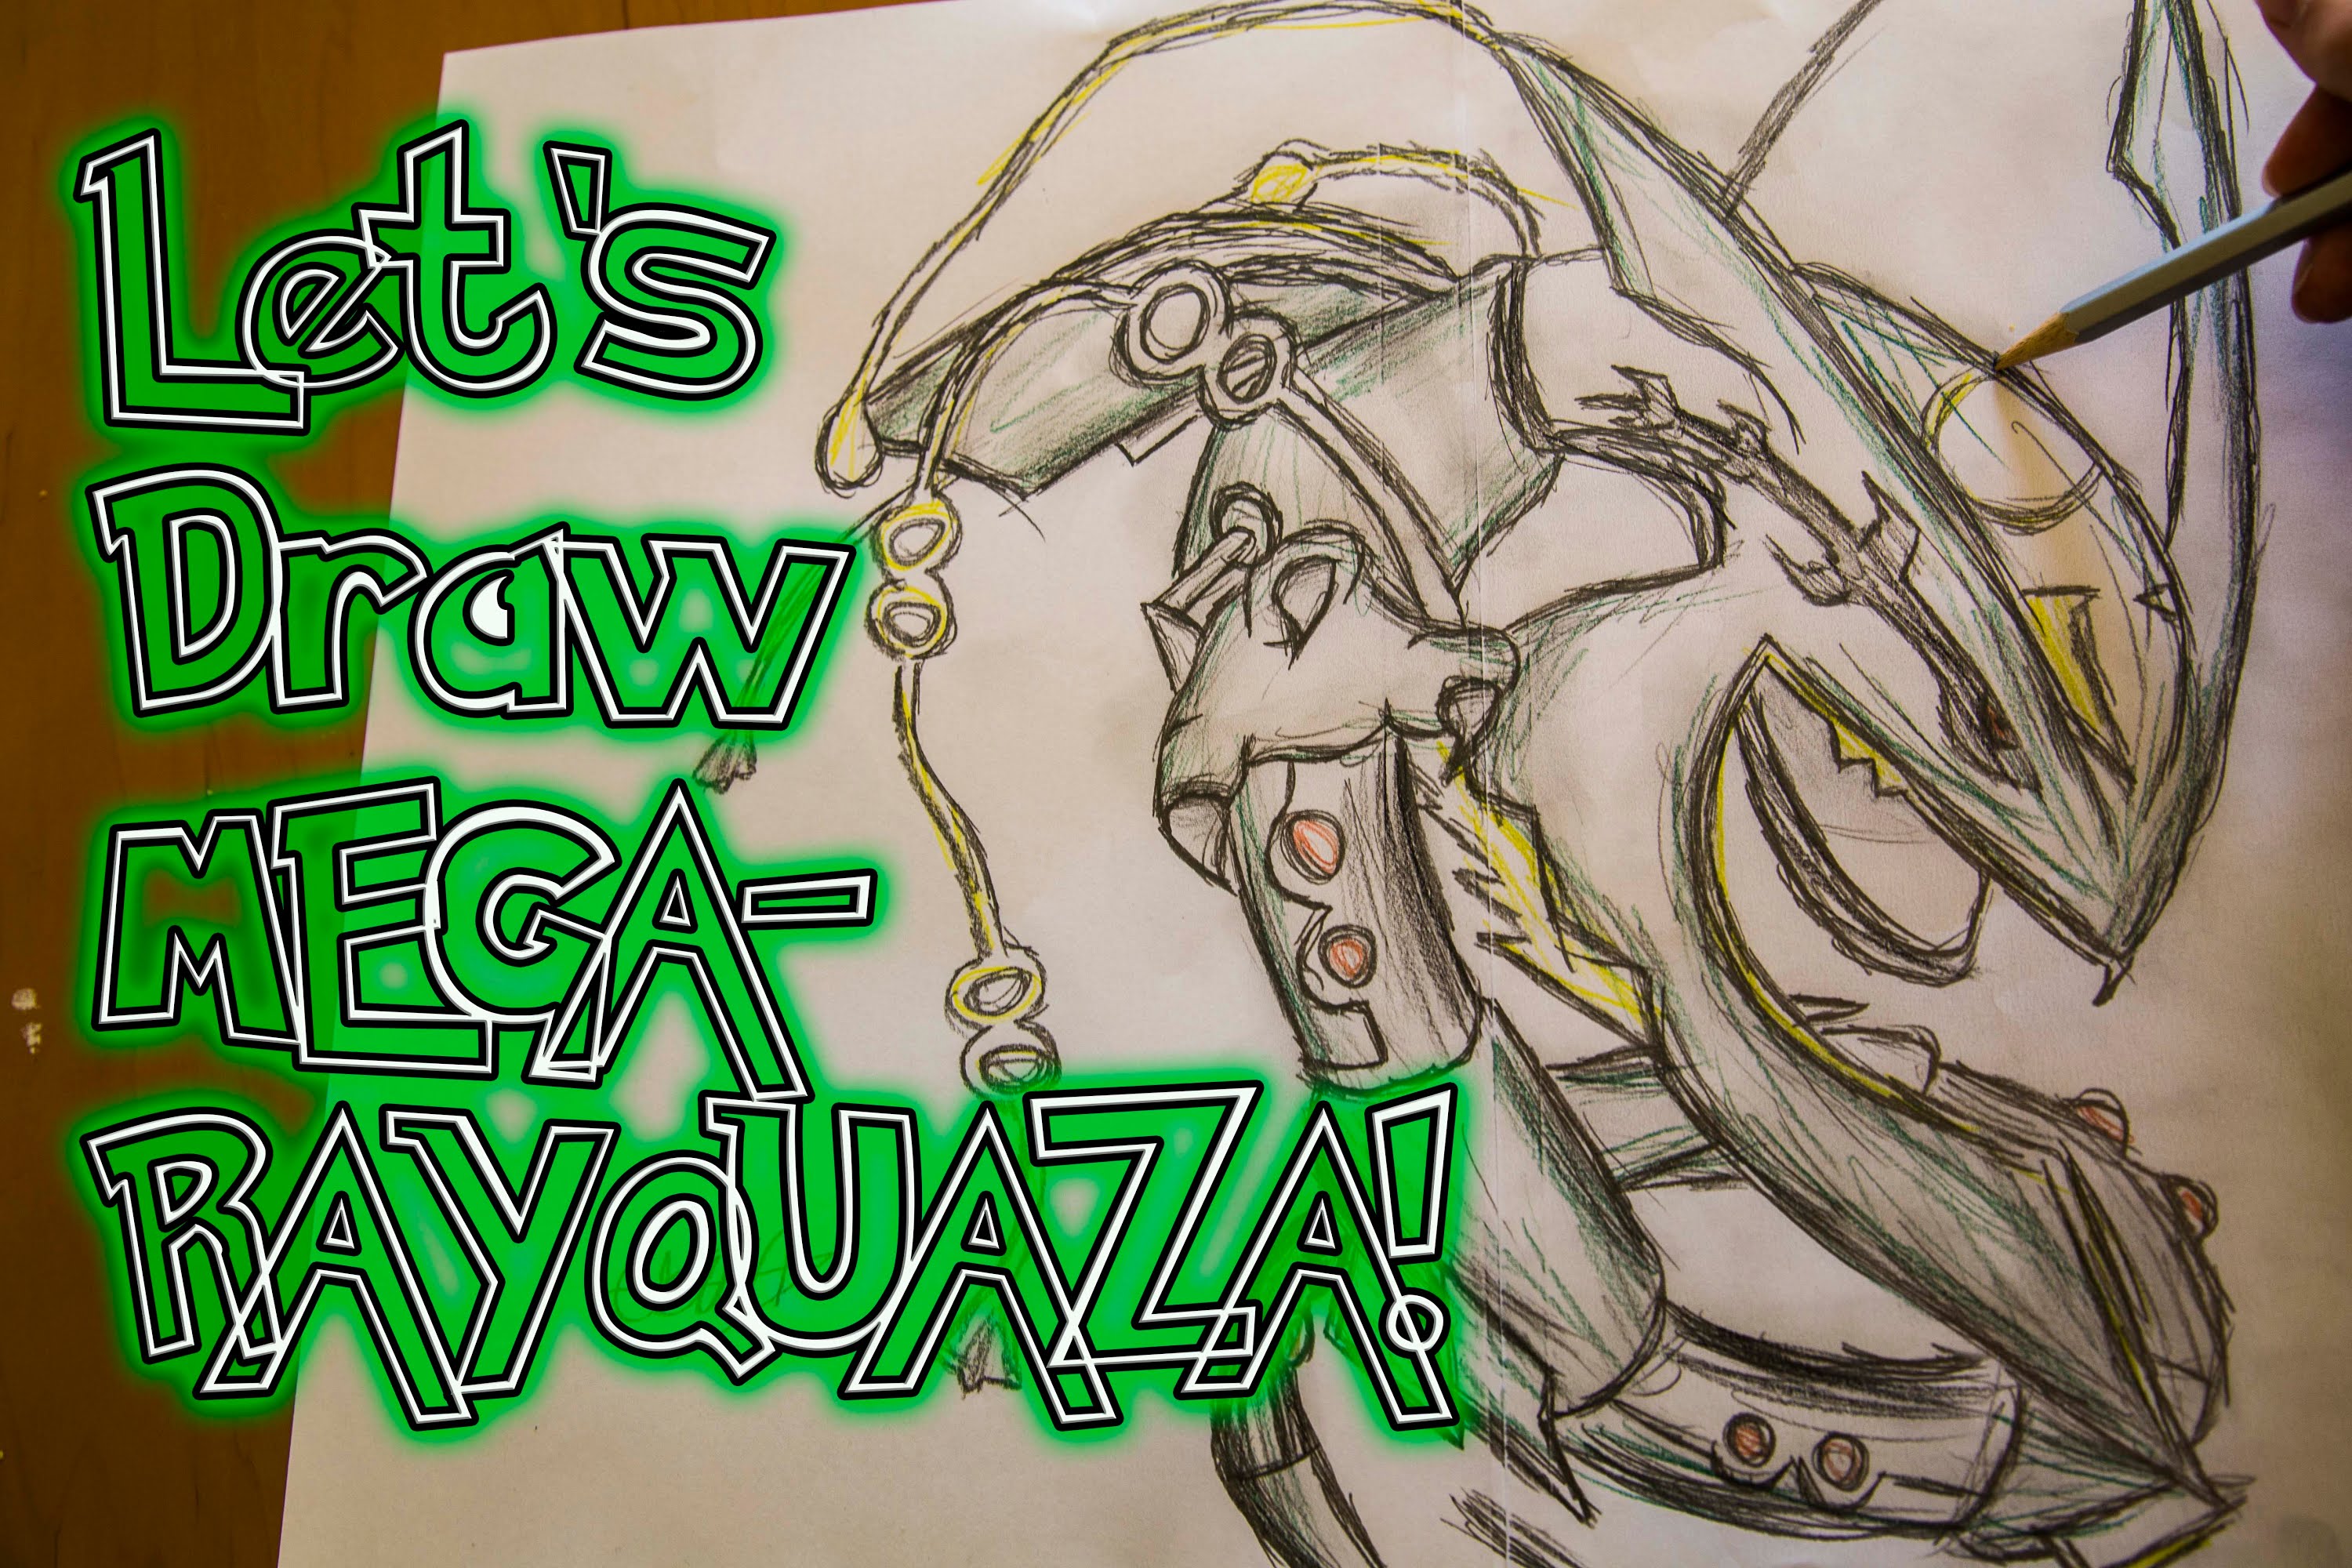 Step By Step How To Draw Mega Rayquaza From Pokemon Images